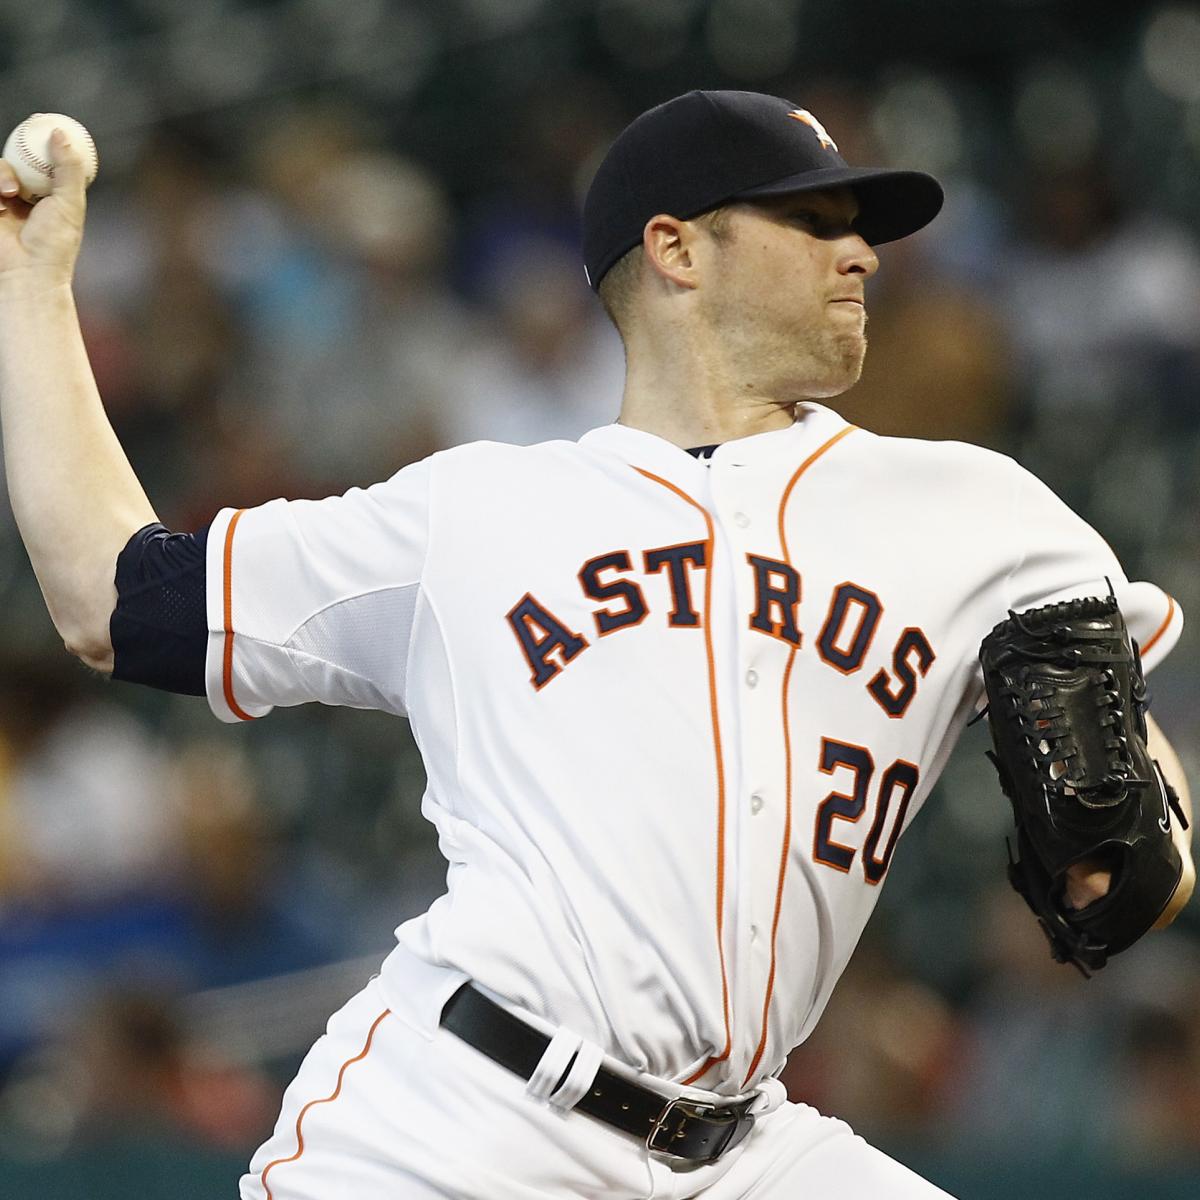 Astros roster moves: L.J. Hoes traded back to Baltimore - The Crawfish Boxes